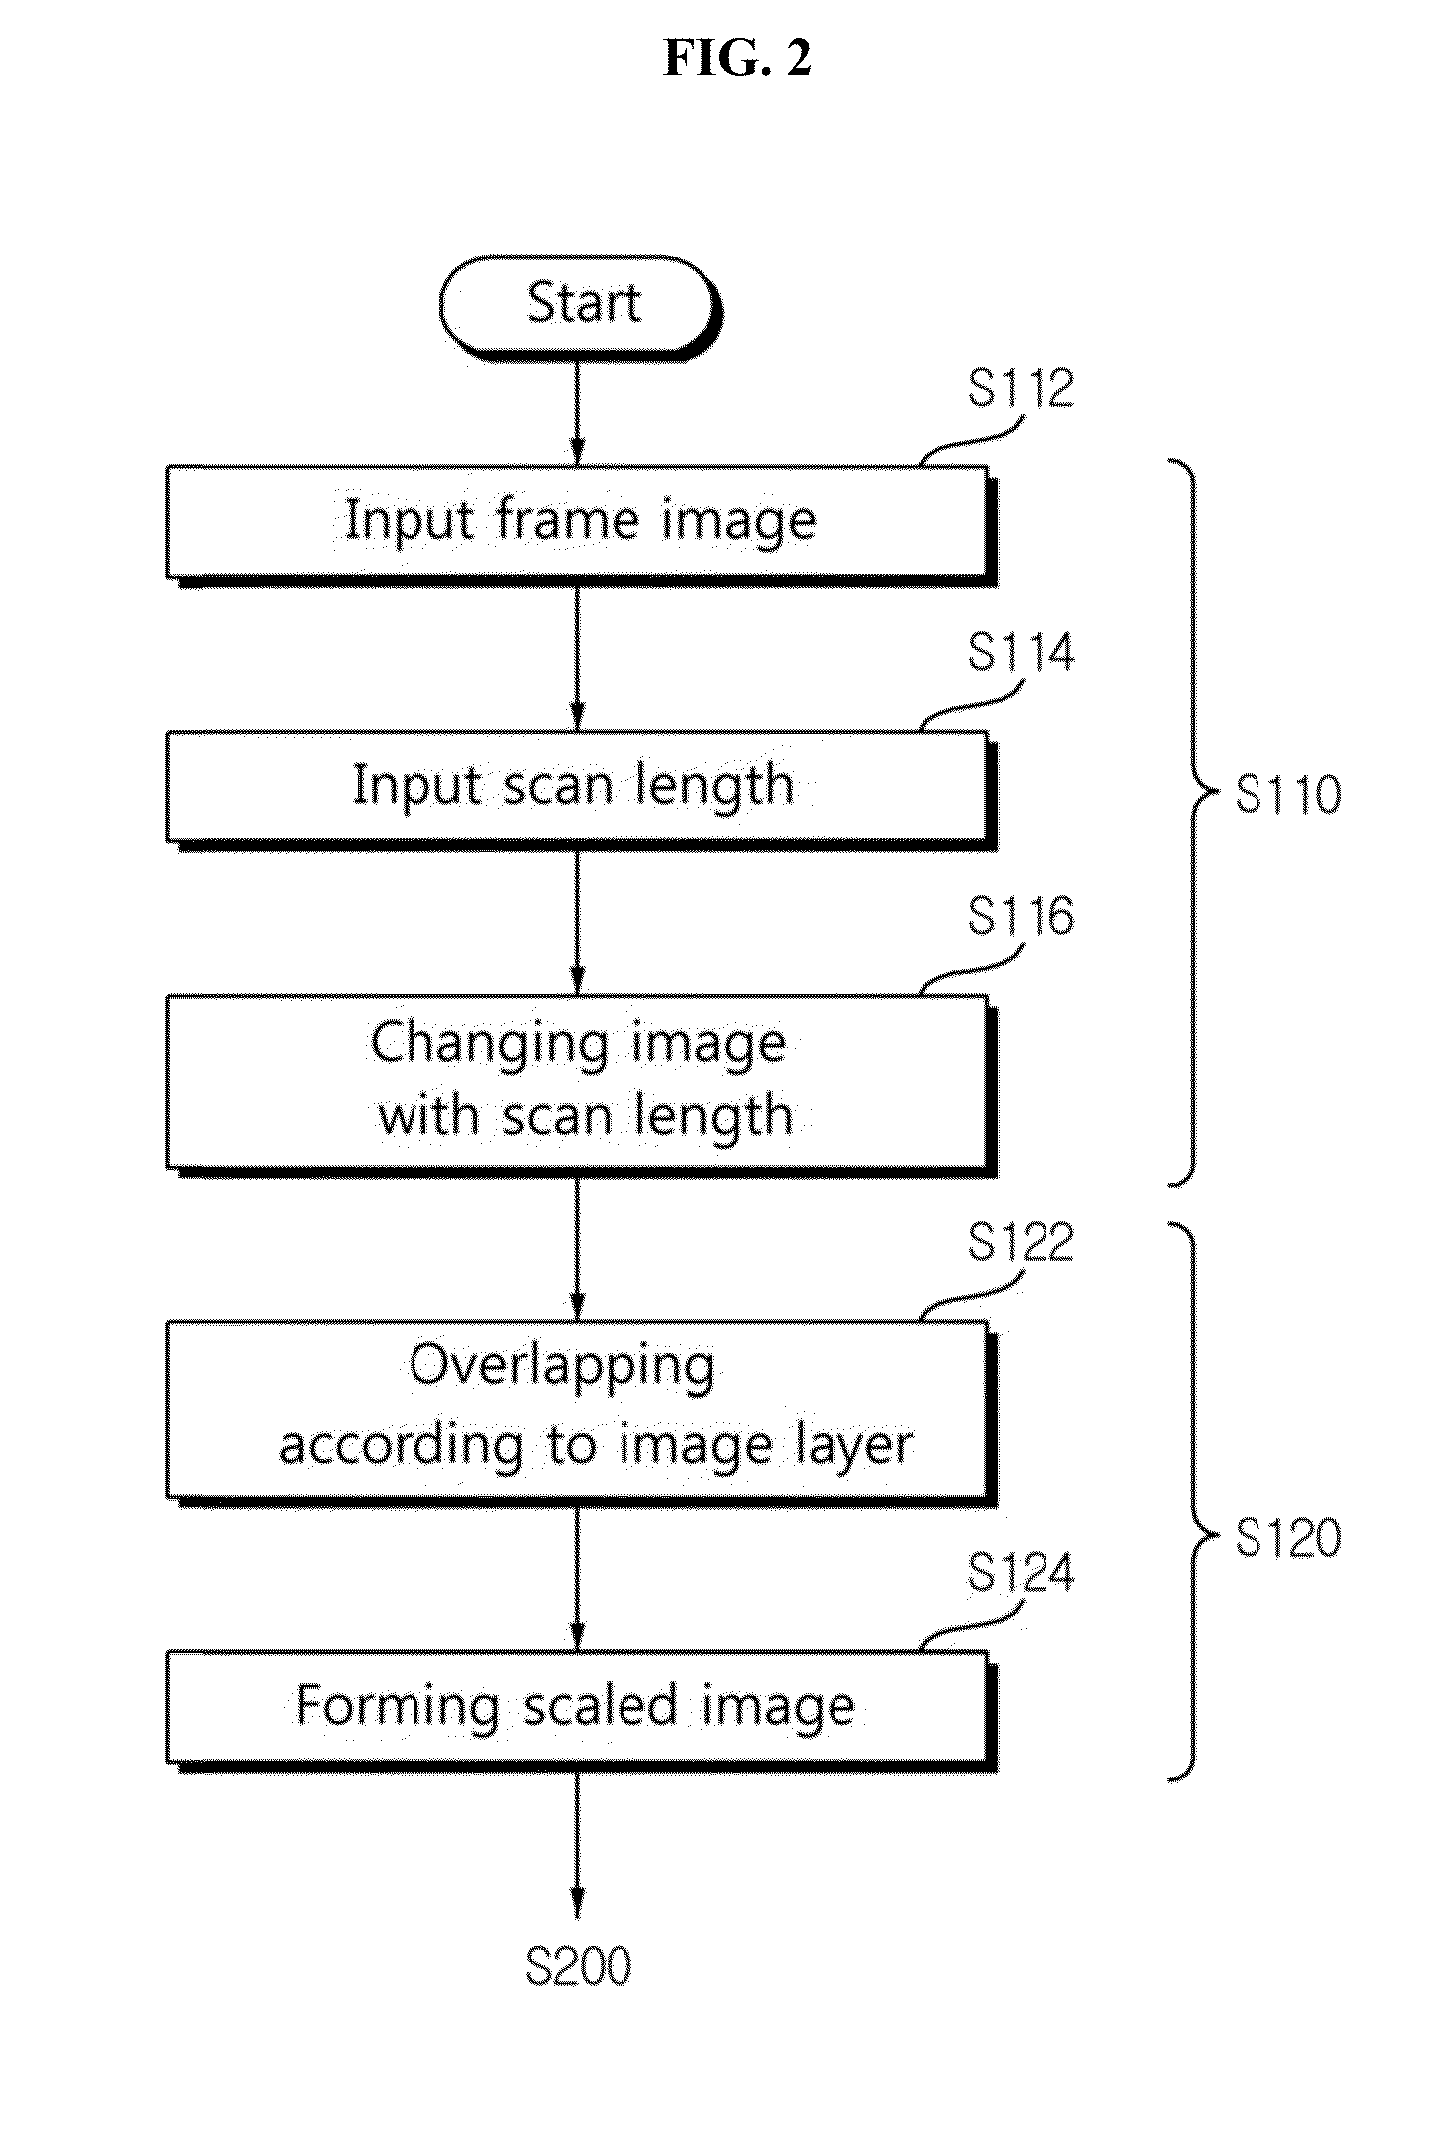 Method and apparatus for providing panorama image data